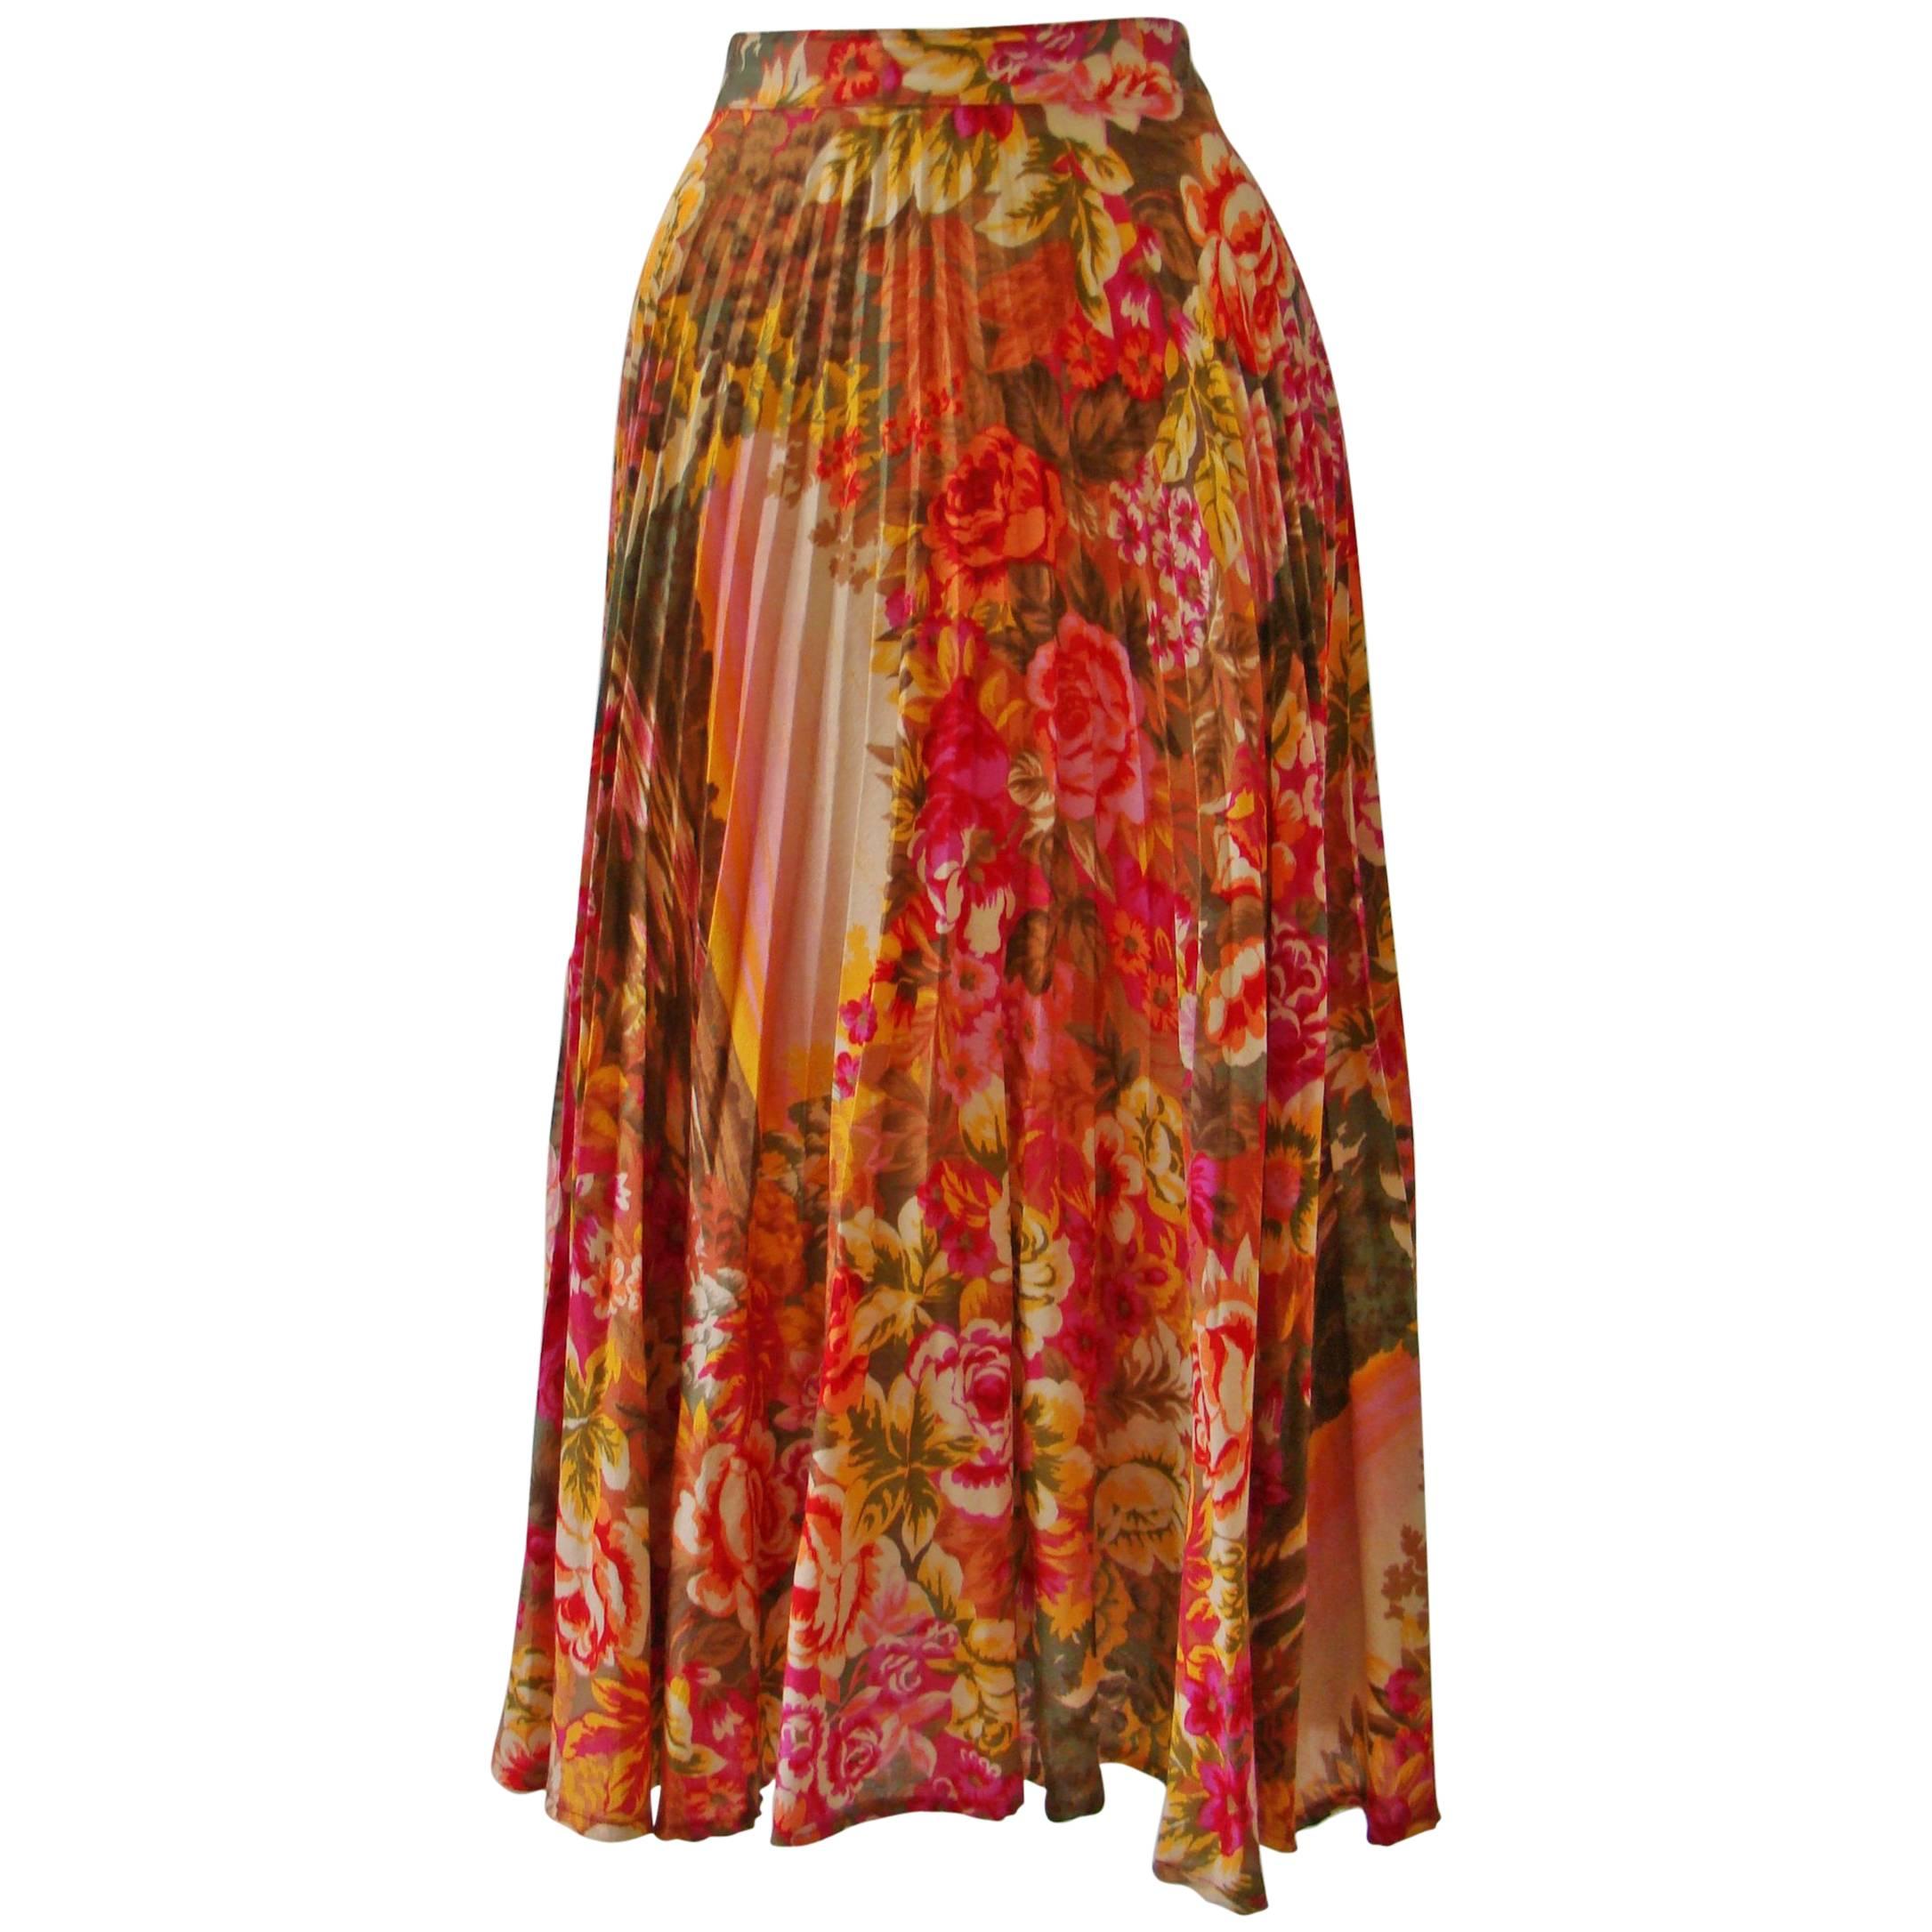 Amazing Kenzo Floral Print Pleated Skirt 1984 For Sale